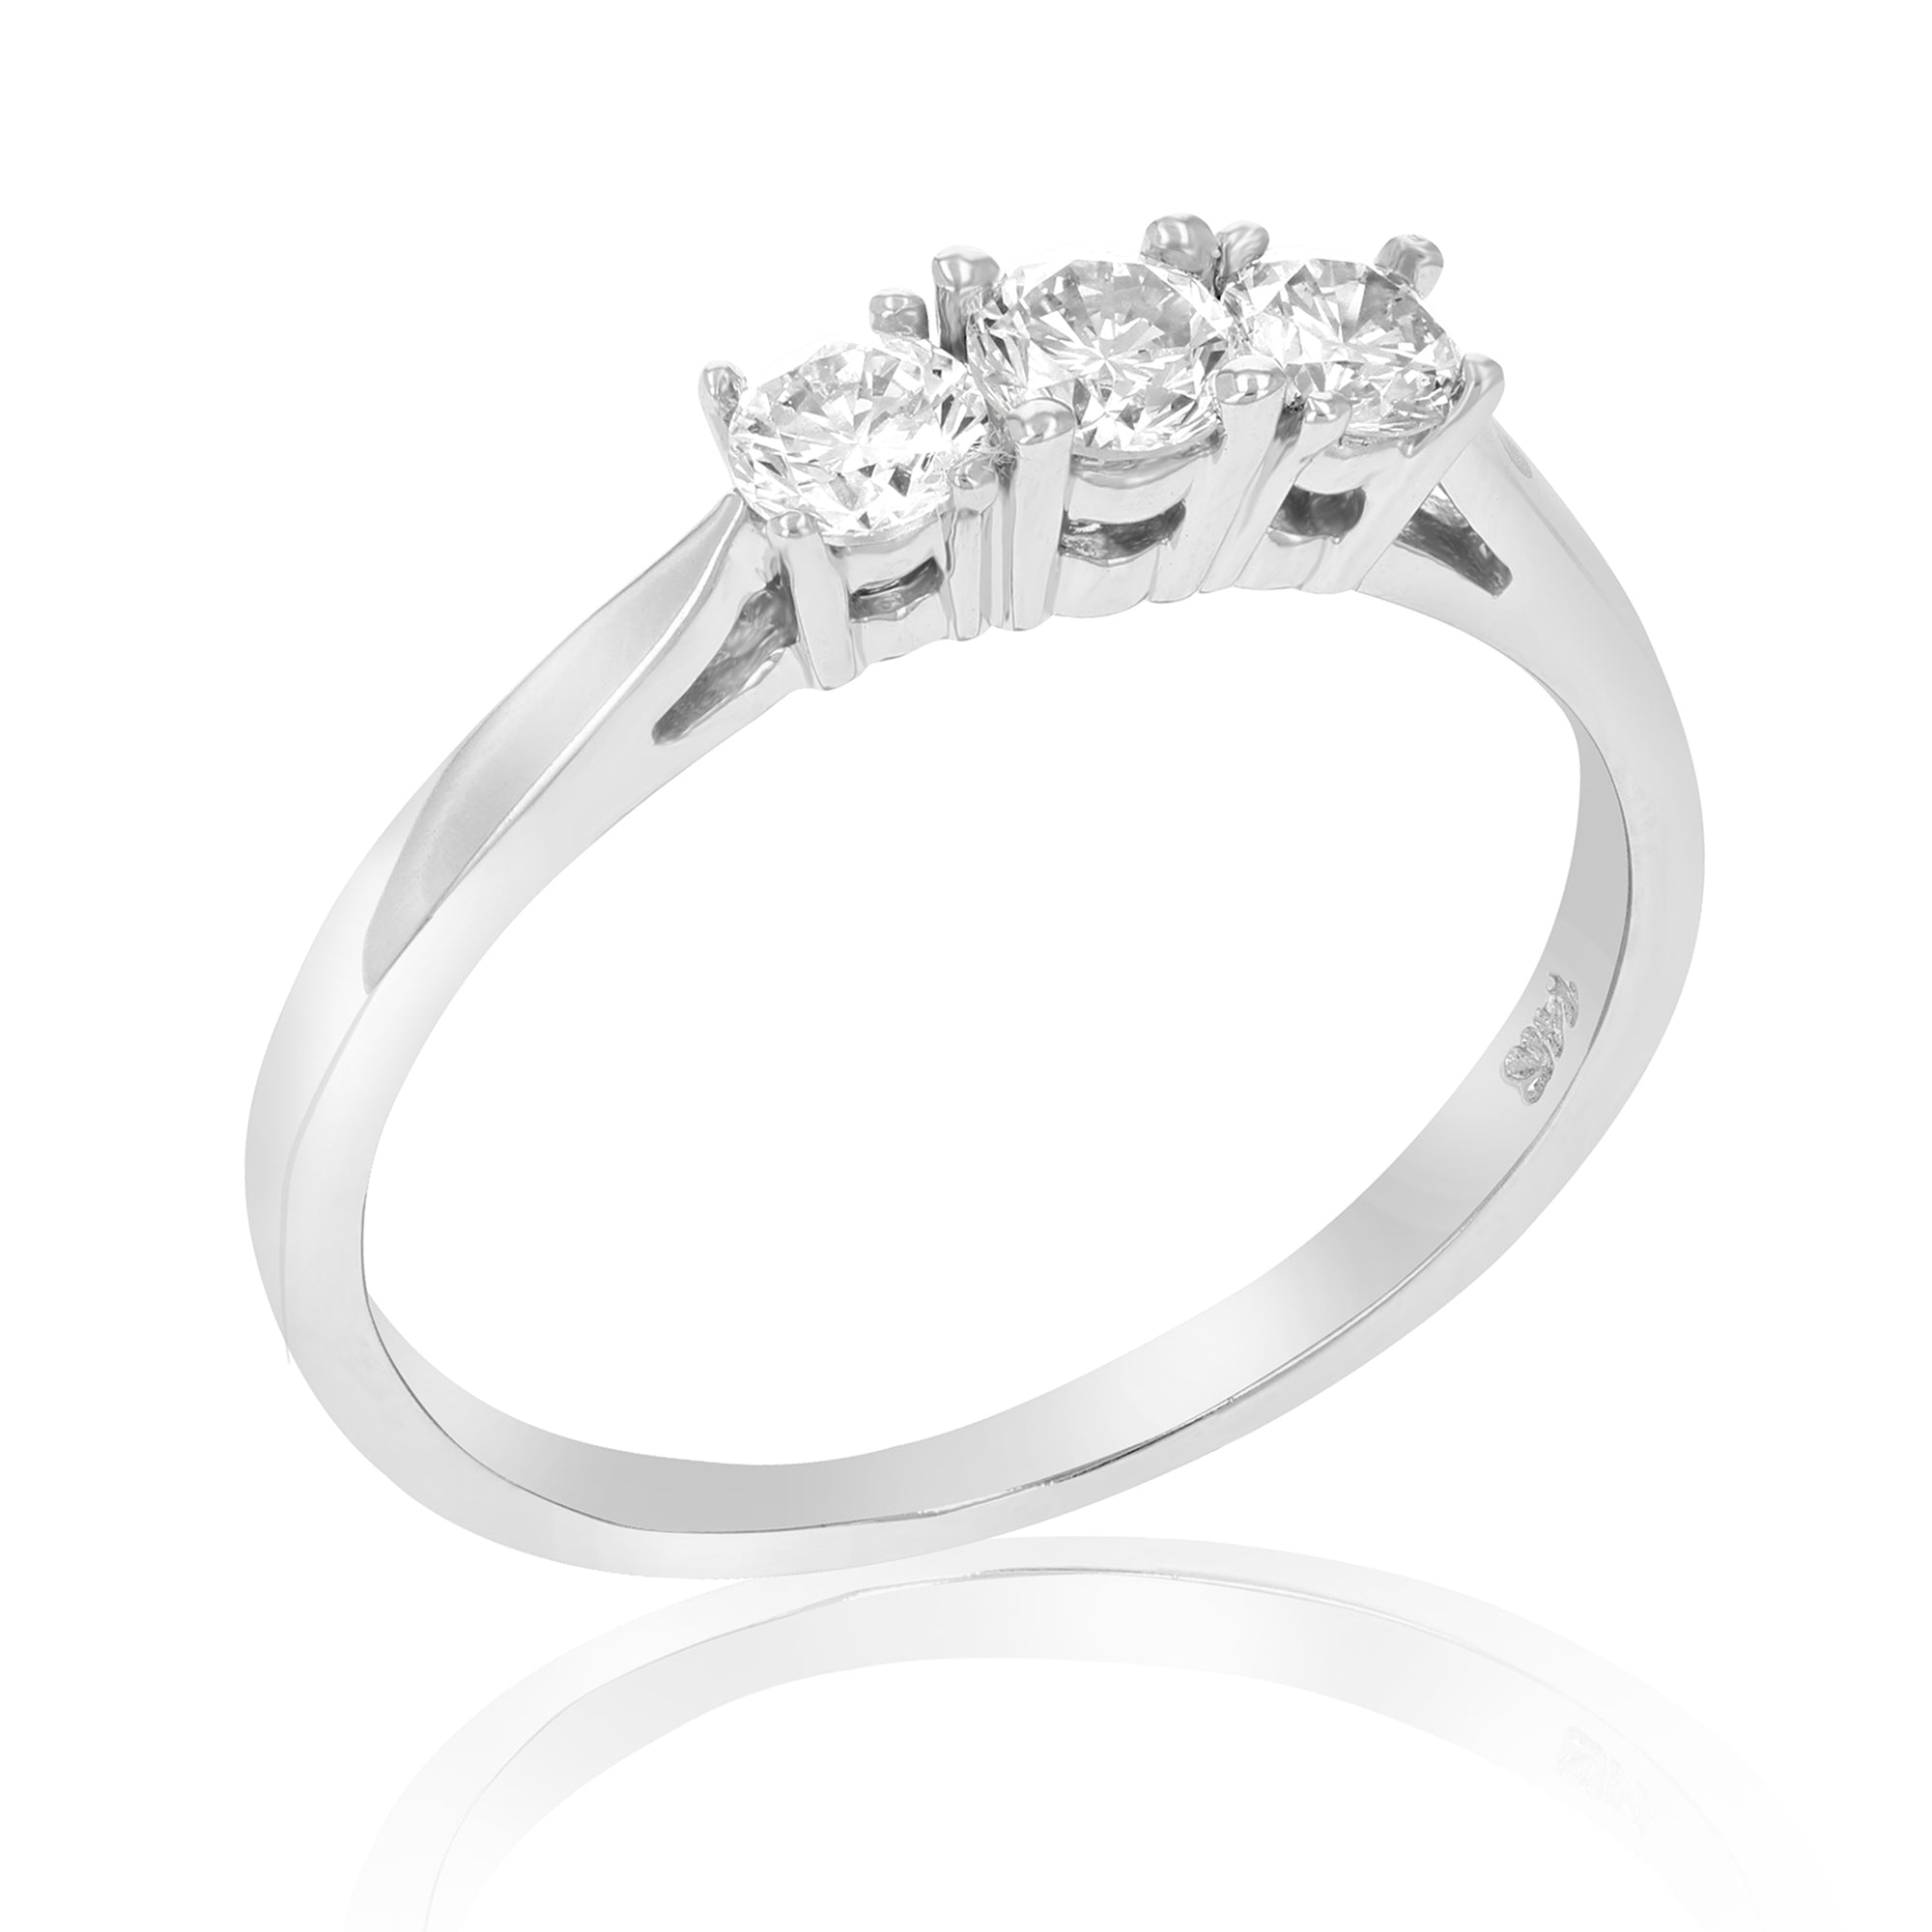 1/2 cttw Certified 3 Stone Diamond Engagement Ring 14K White Gold SI2-I1